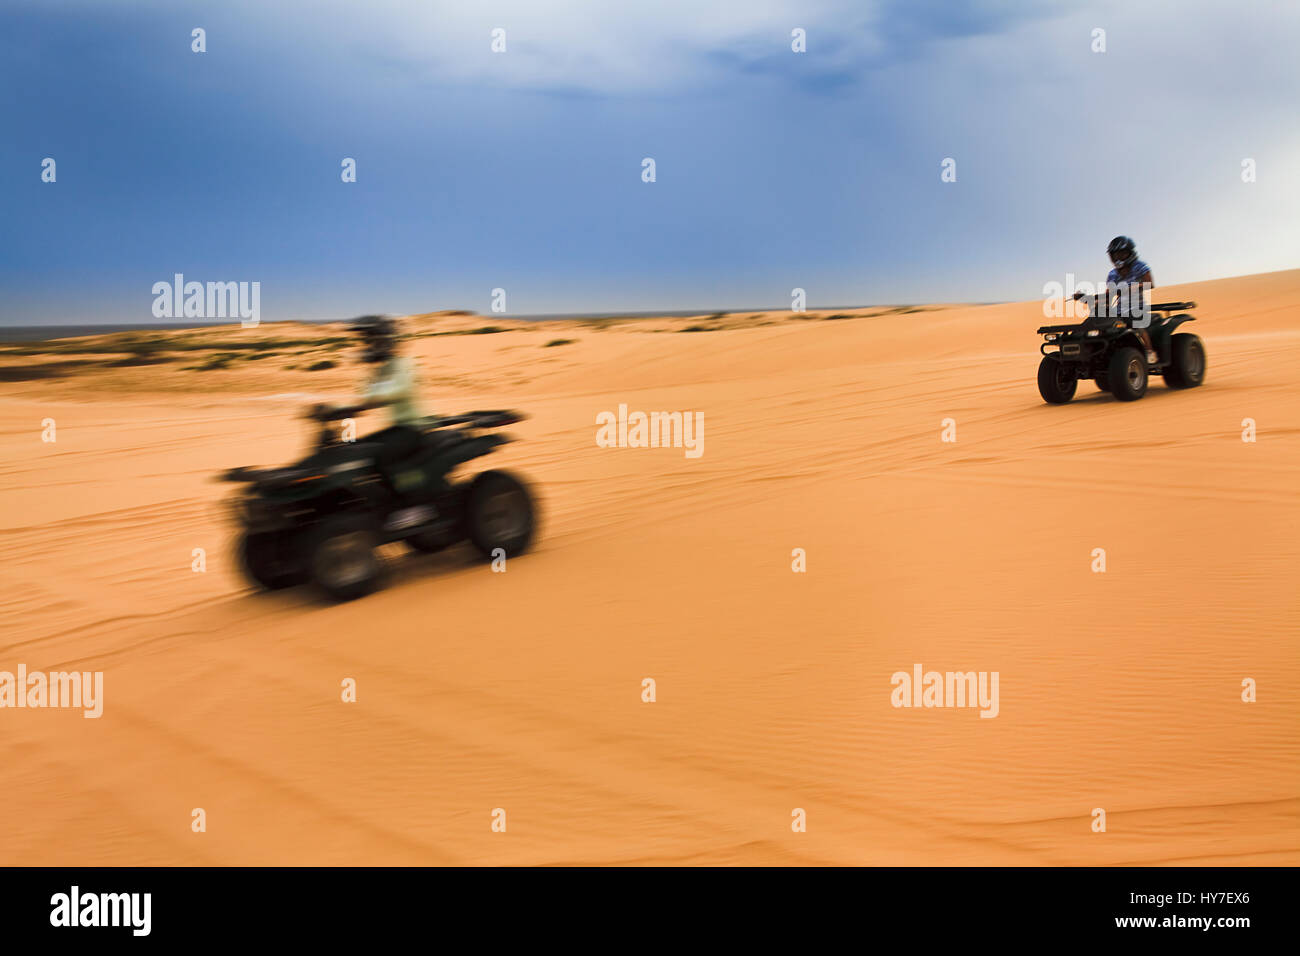 A couple of fast quadbikes riding through the remote sand dunes at speed blurred with panning making drivers unrecognizable. Stock Photo